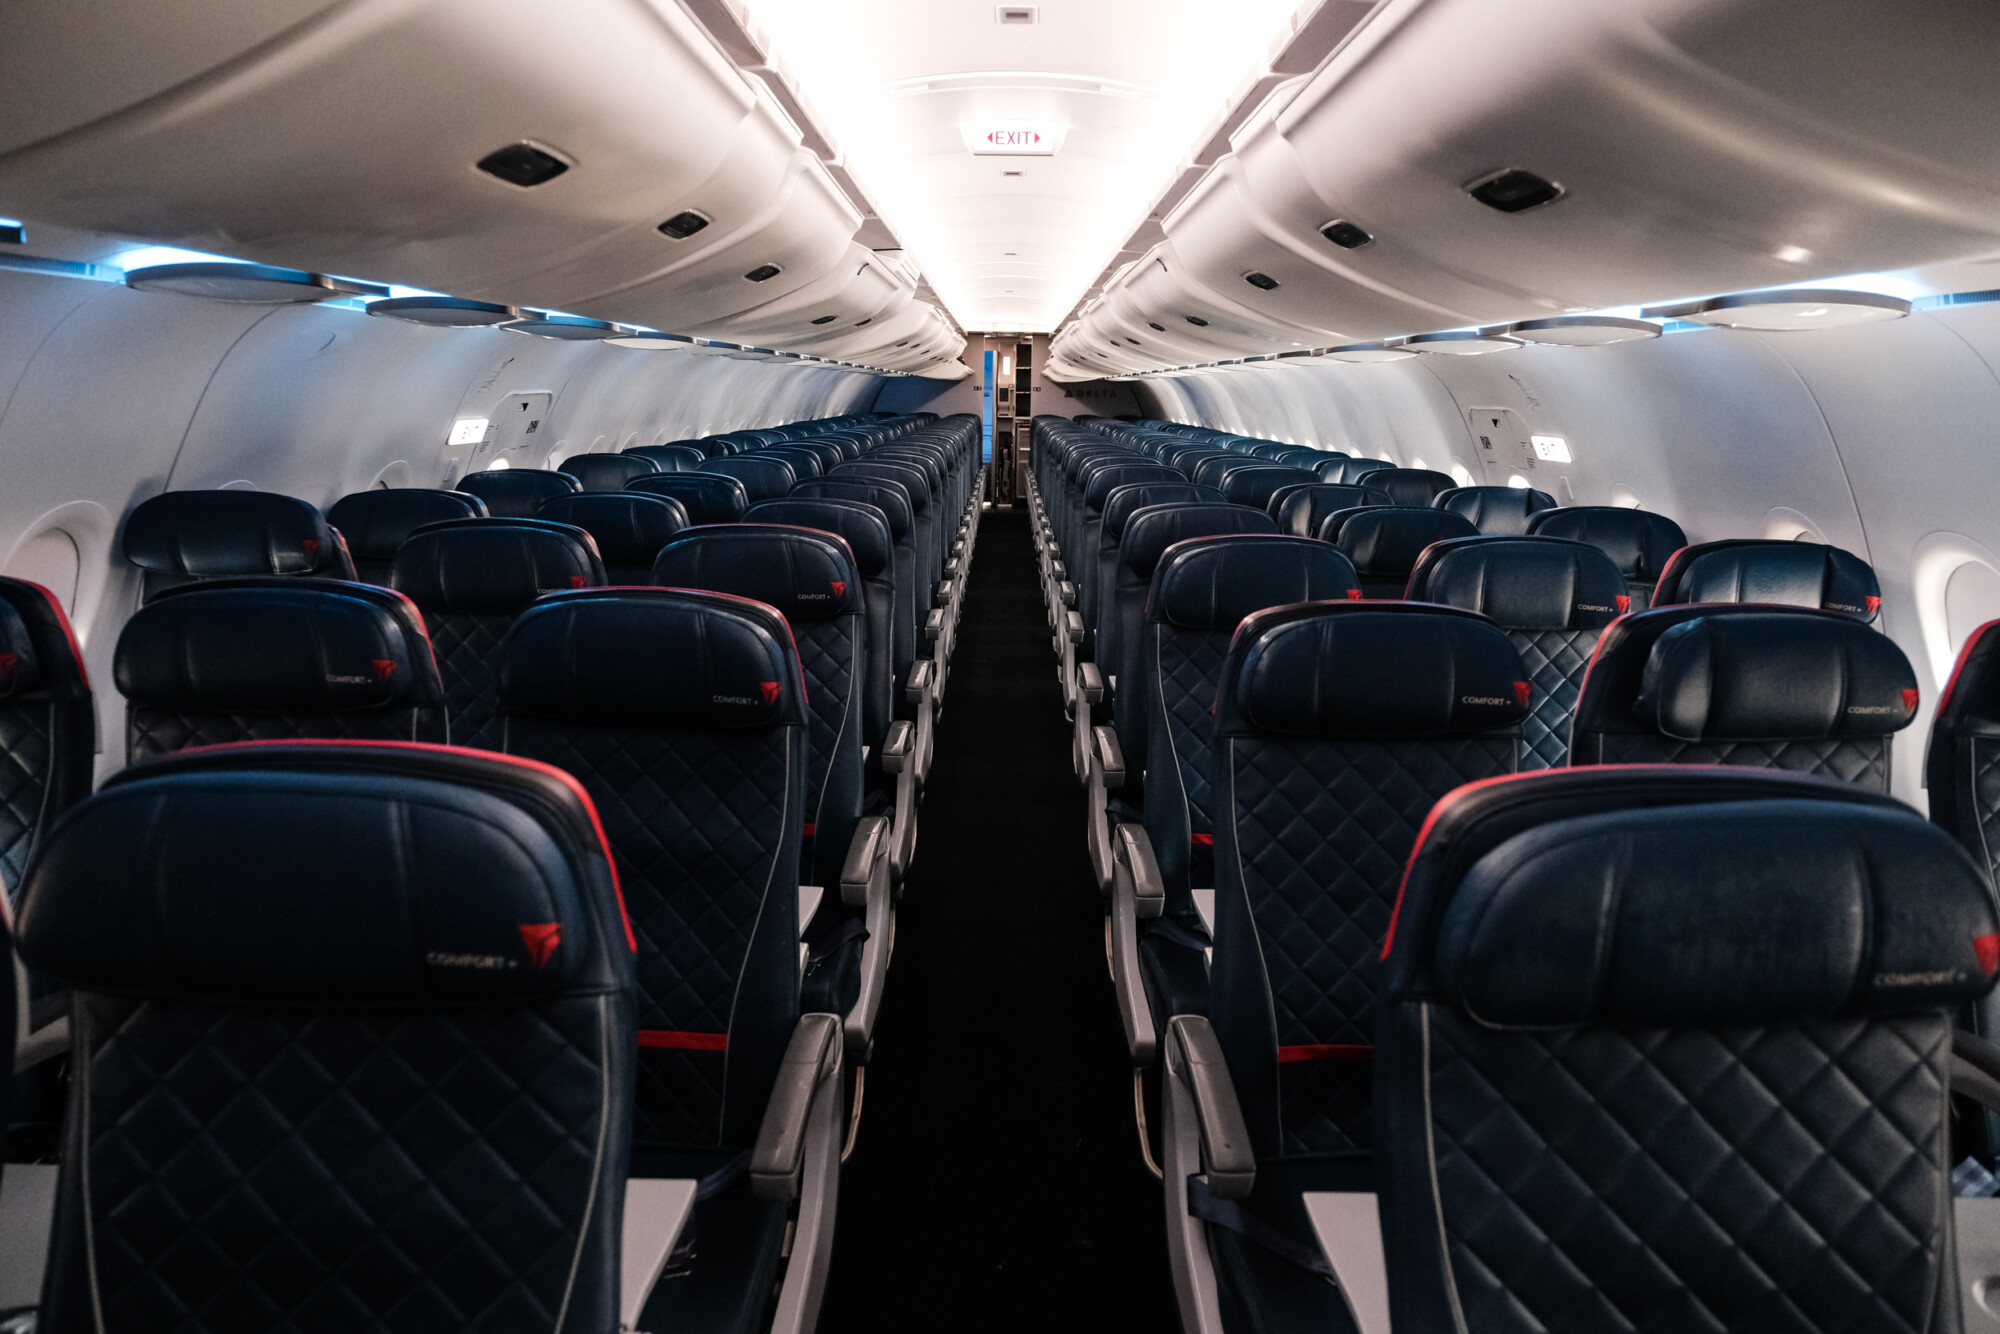 Delta to Stop Blocking Middle Seats